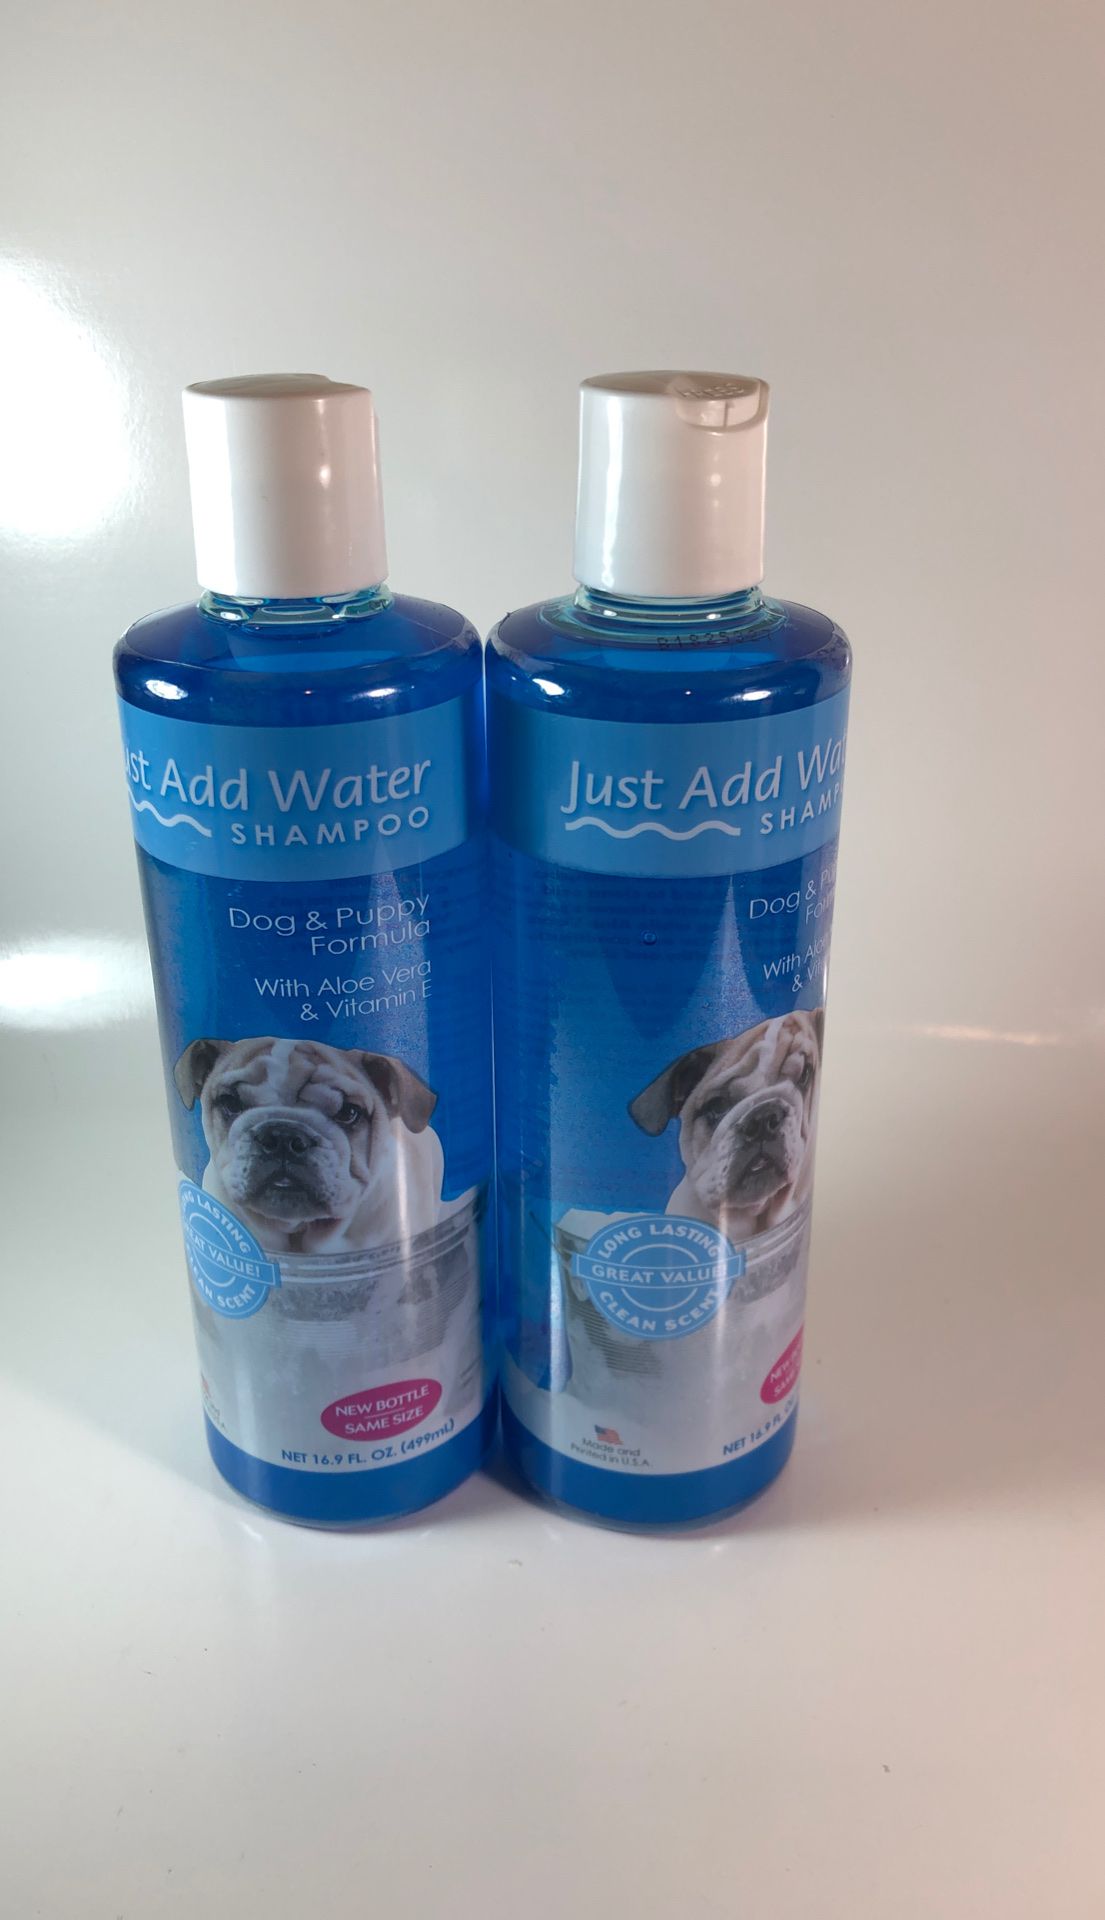 Just Add Water Shampoo, Dog and Puppy Formula w/ Aloe Vera Clean Scent Pack of 2